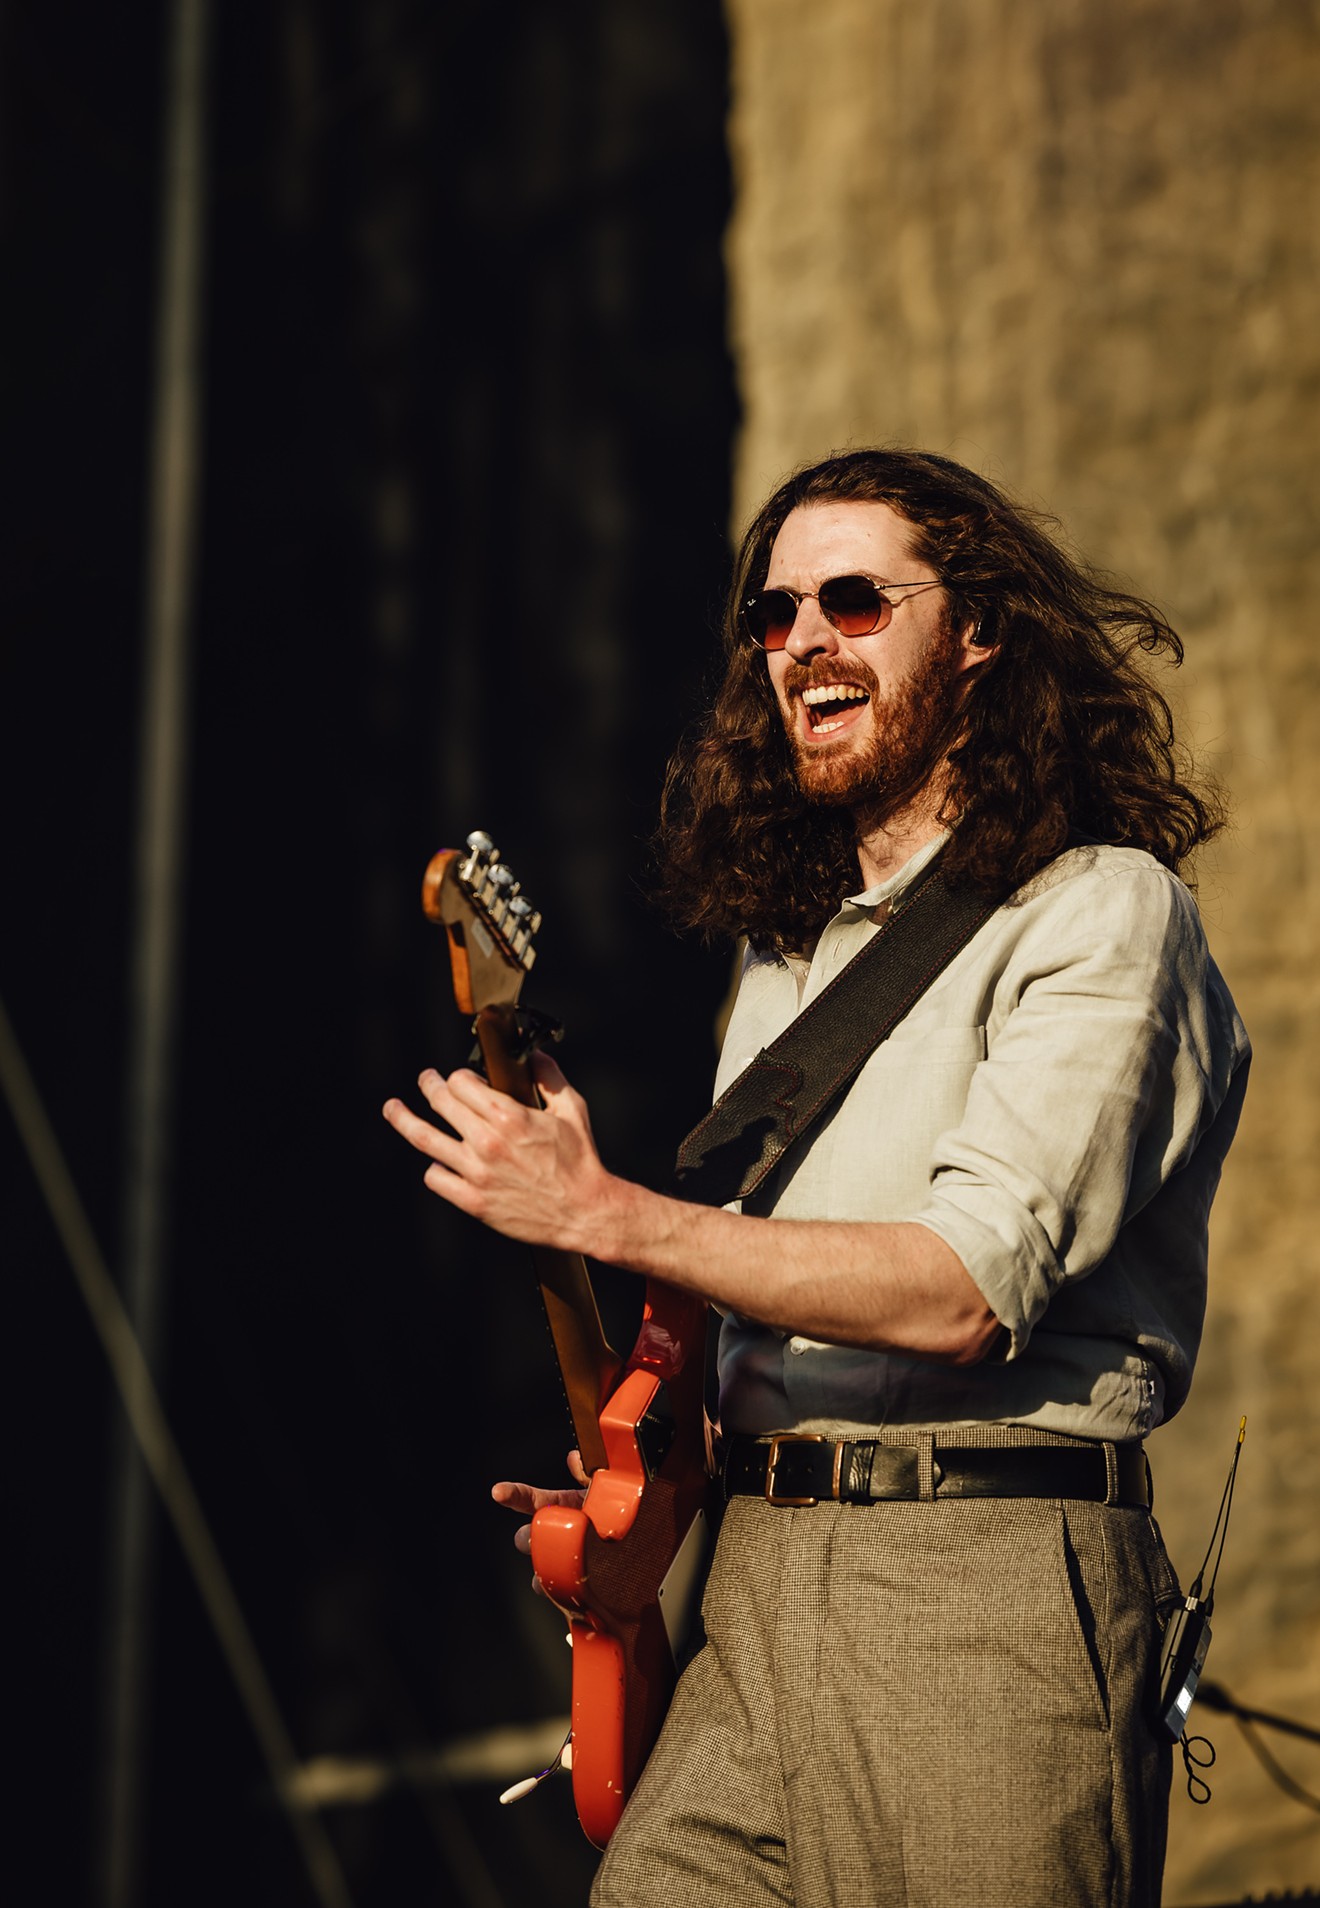 Hozier Is So Much More Than a One-Hit Wonder | Dallas Observer